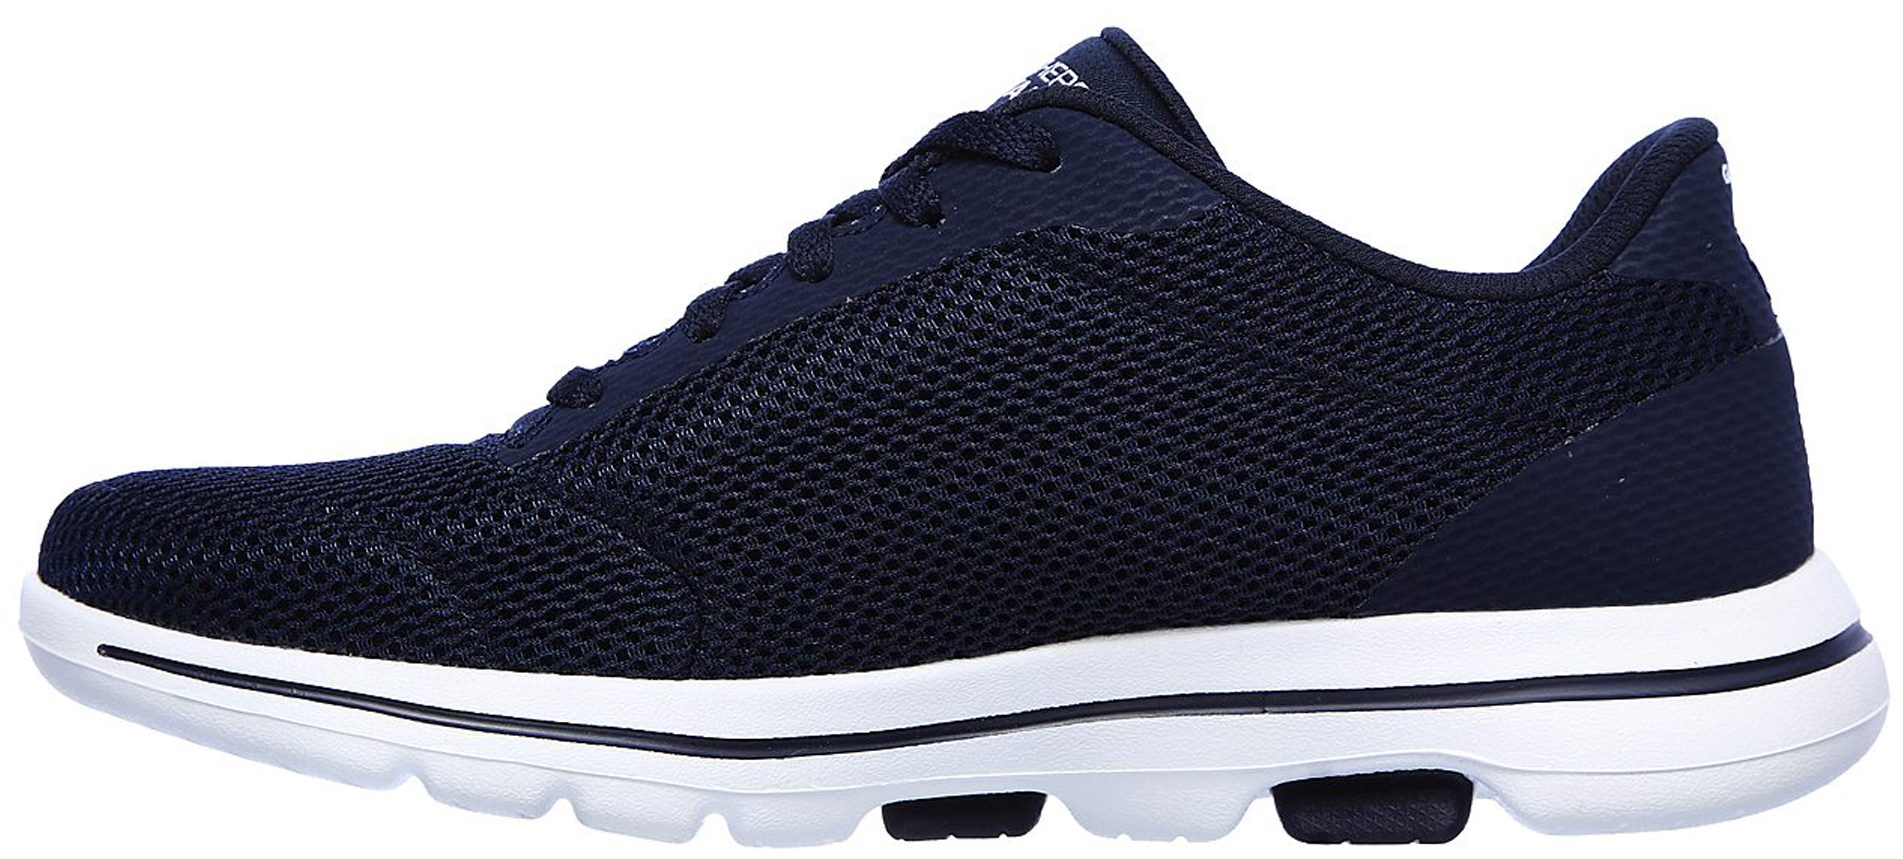 Skechers GOwalk 5 - Lucky Navy / White 15902 NVW - Womens Trainers ...